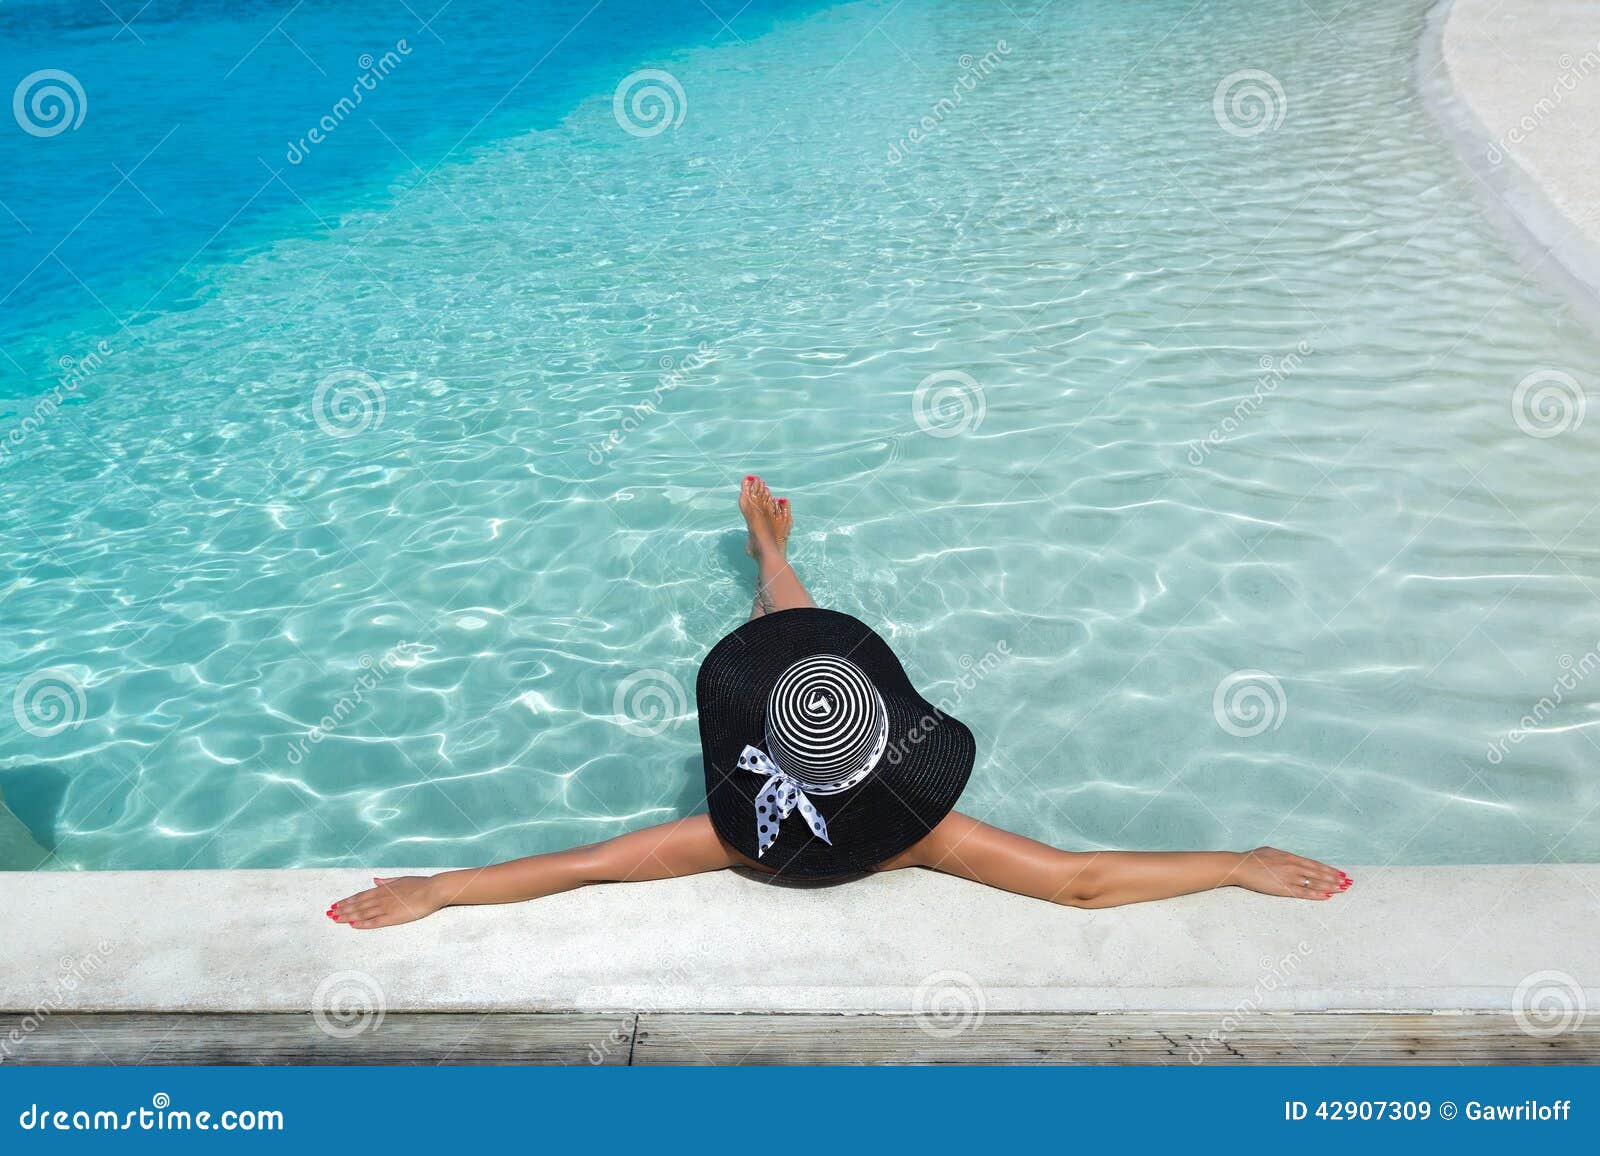 woman in hat relaxing at the pool